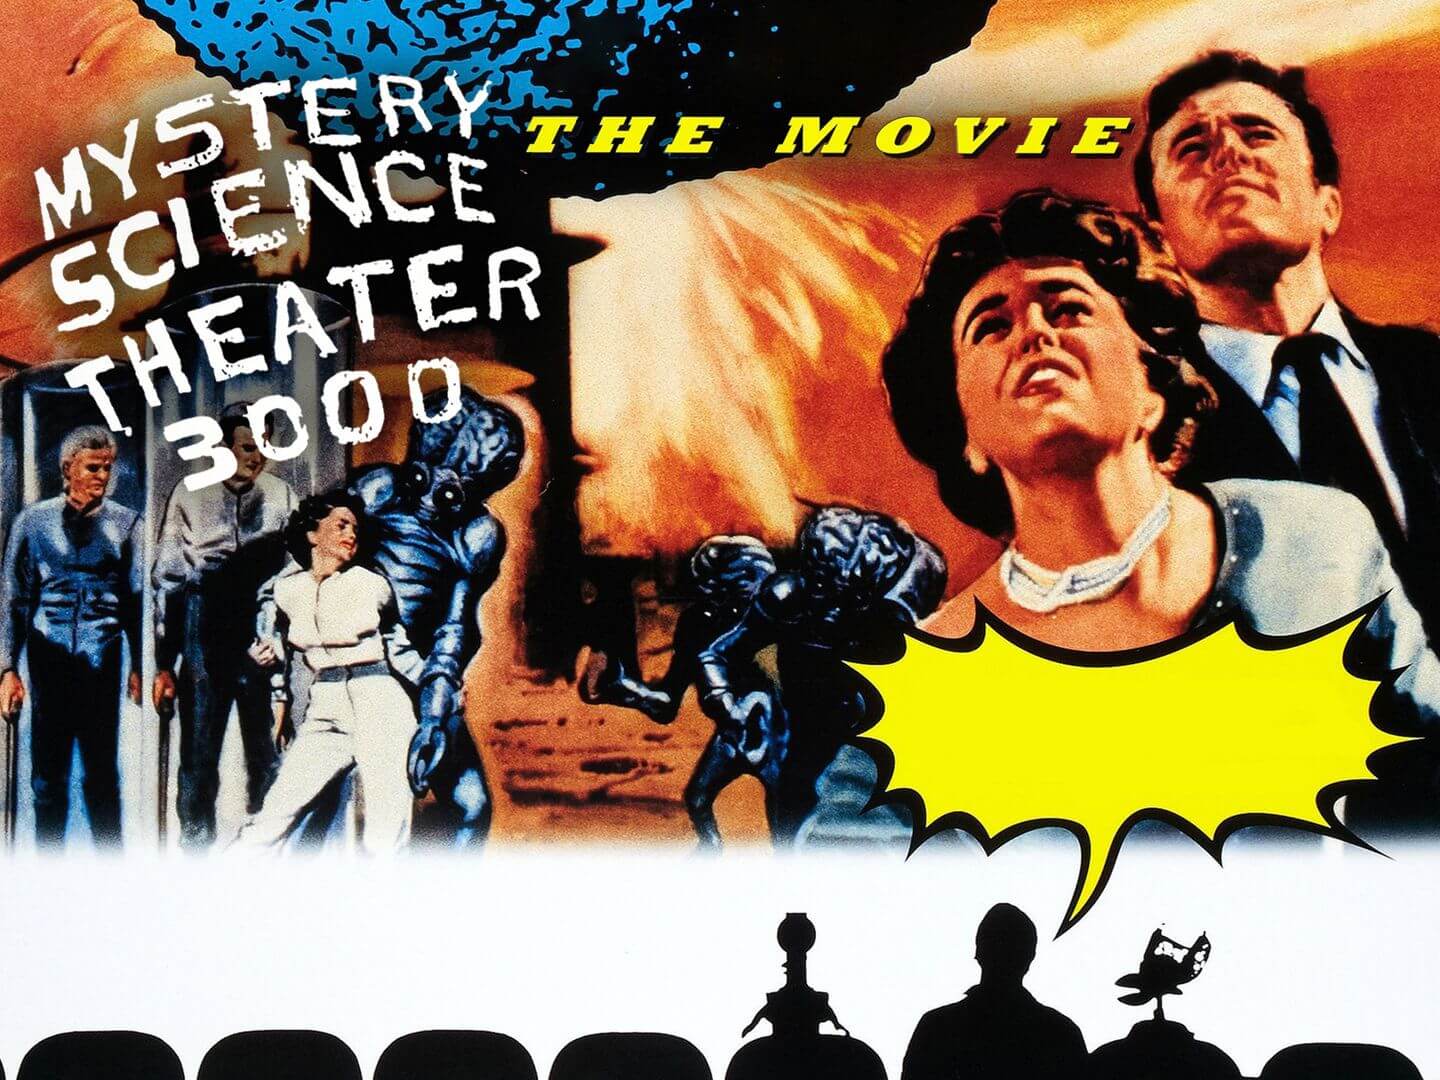 43-facts-about-the-movie-mystery-science-theater-3000-the-movie